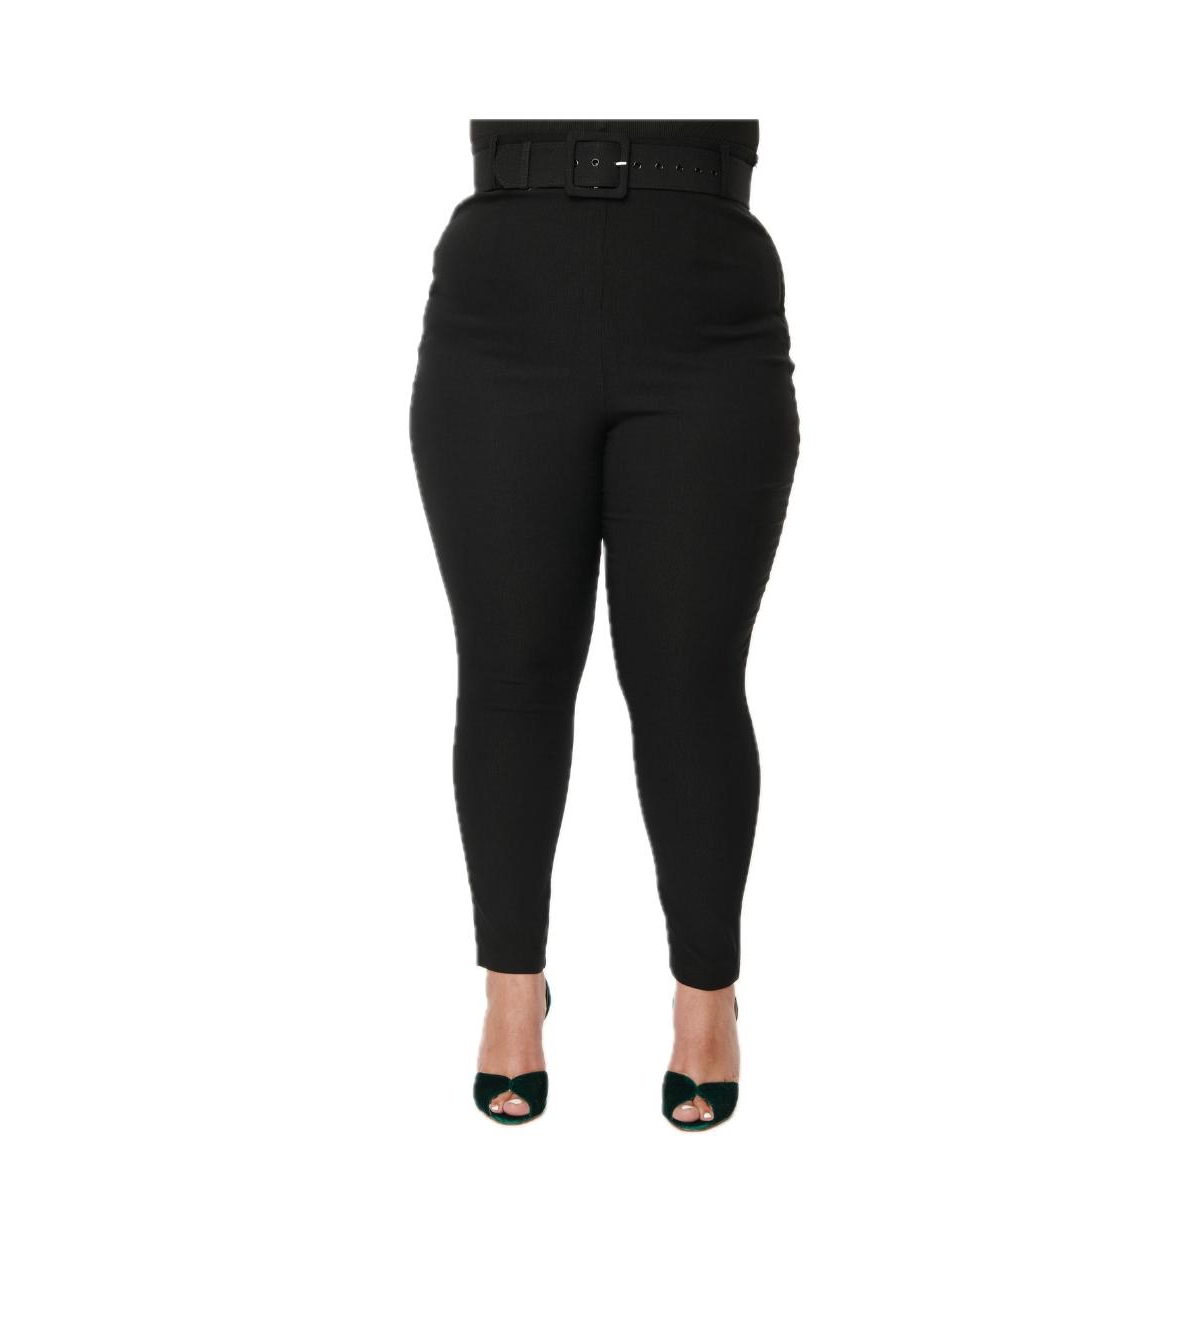 Plus Size Belted Rizzo Cigarette Pants - Black